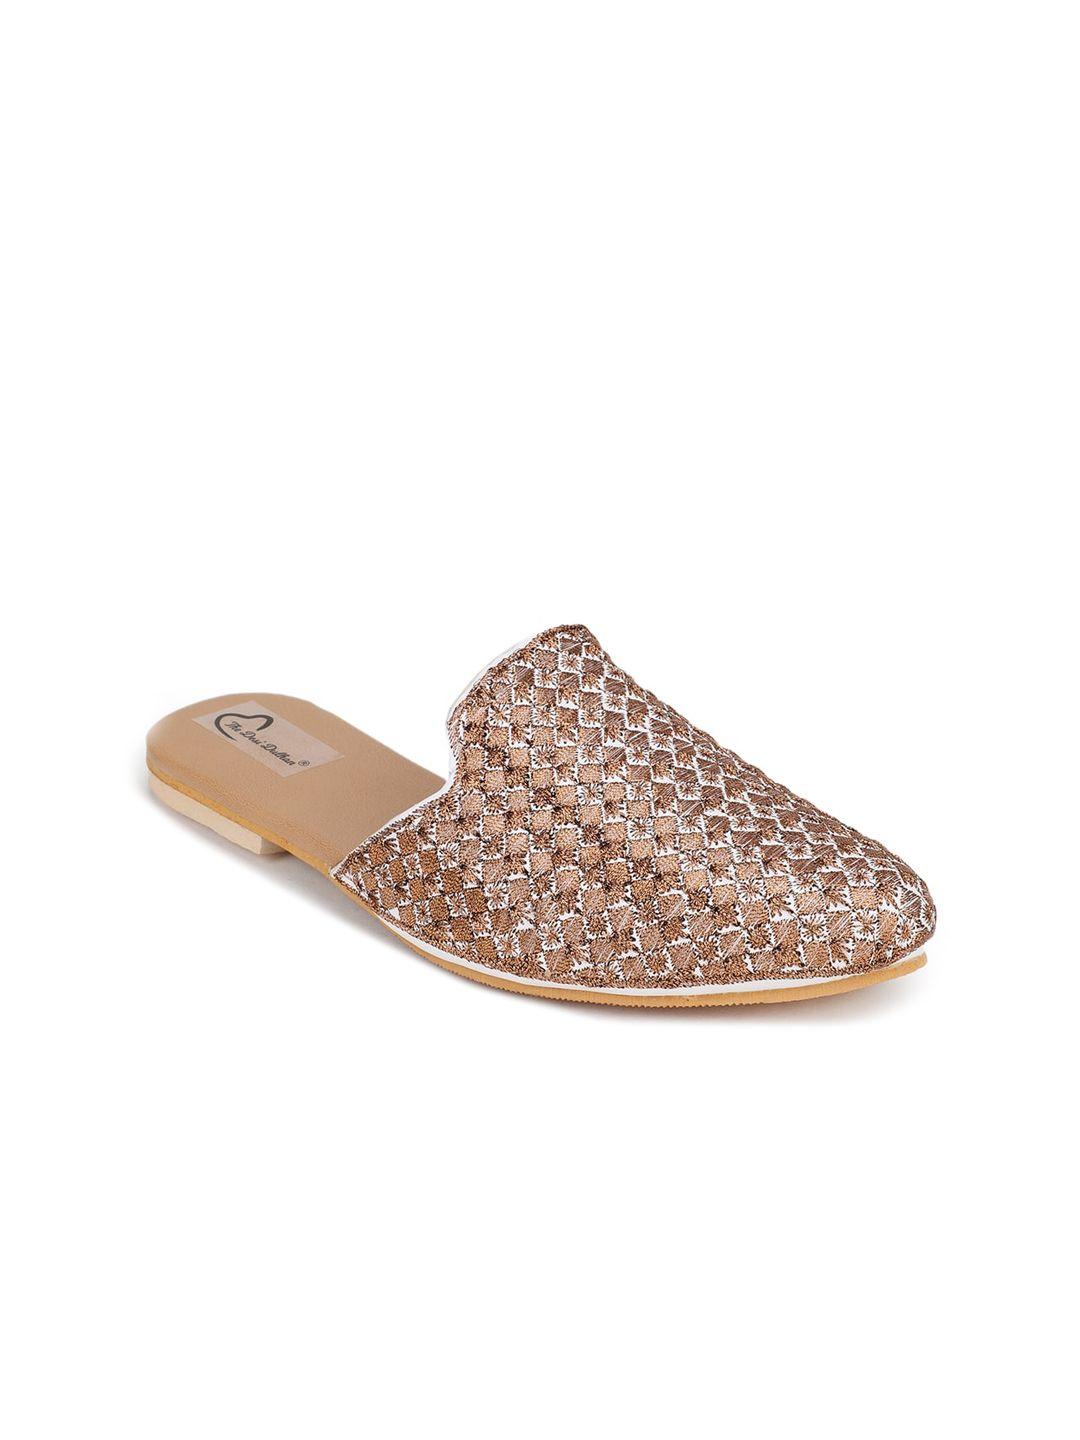 the desi dulhan women copper-toned textured leather ethnic flats